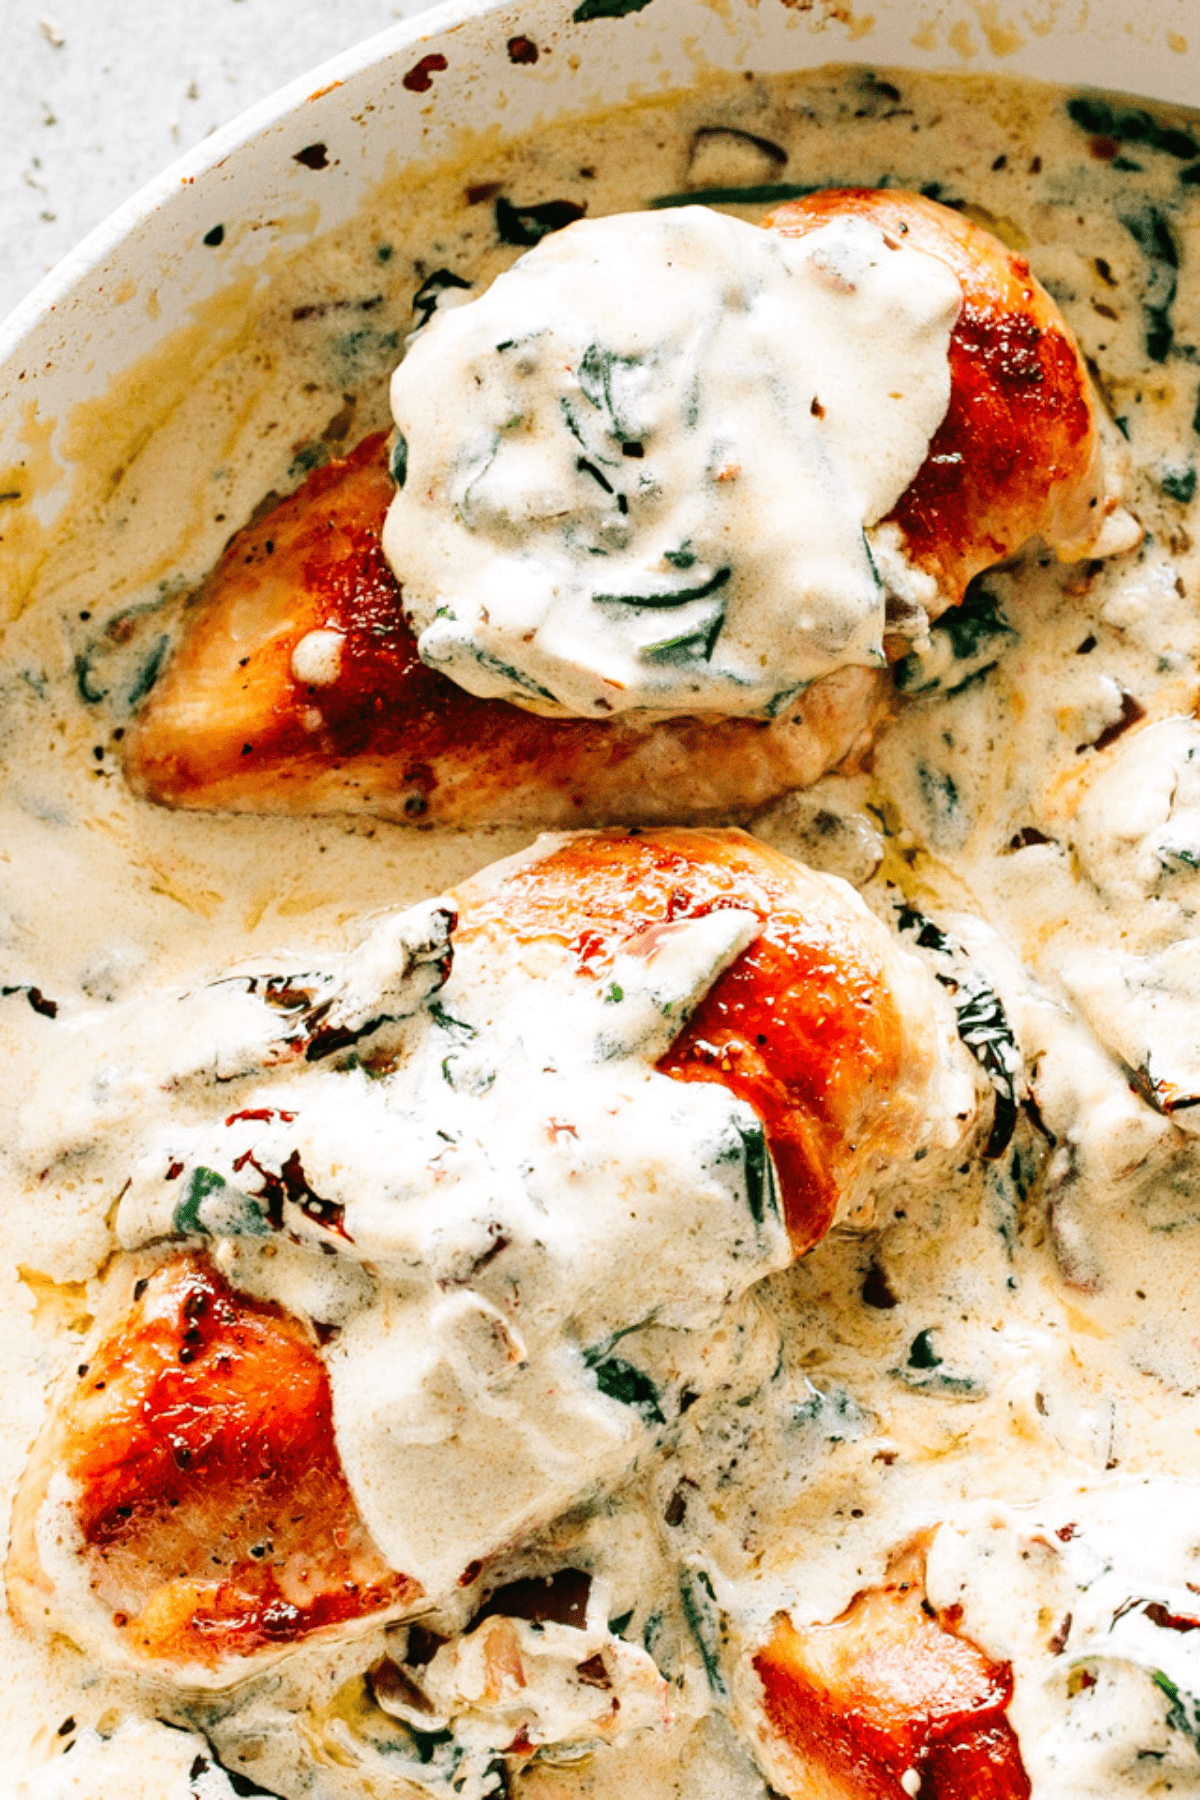 Chicken breasts with creamy sauce on top.